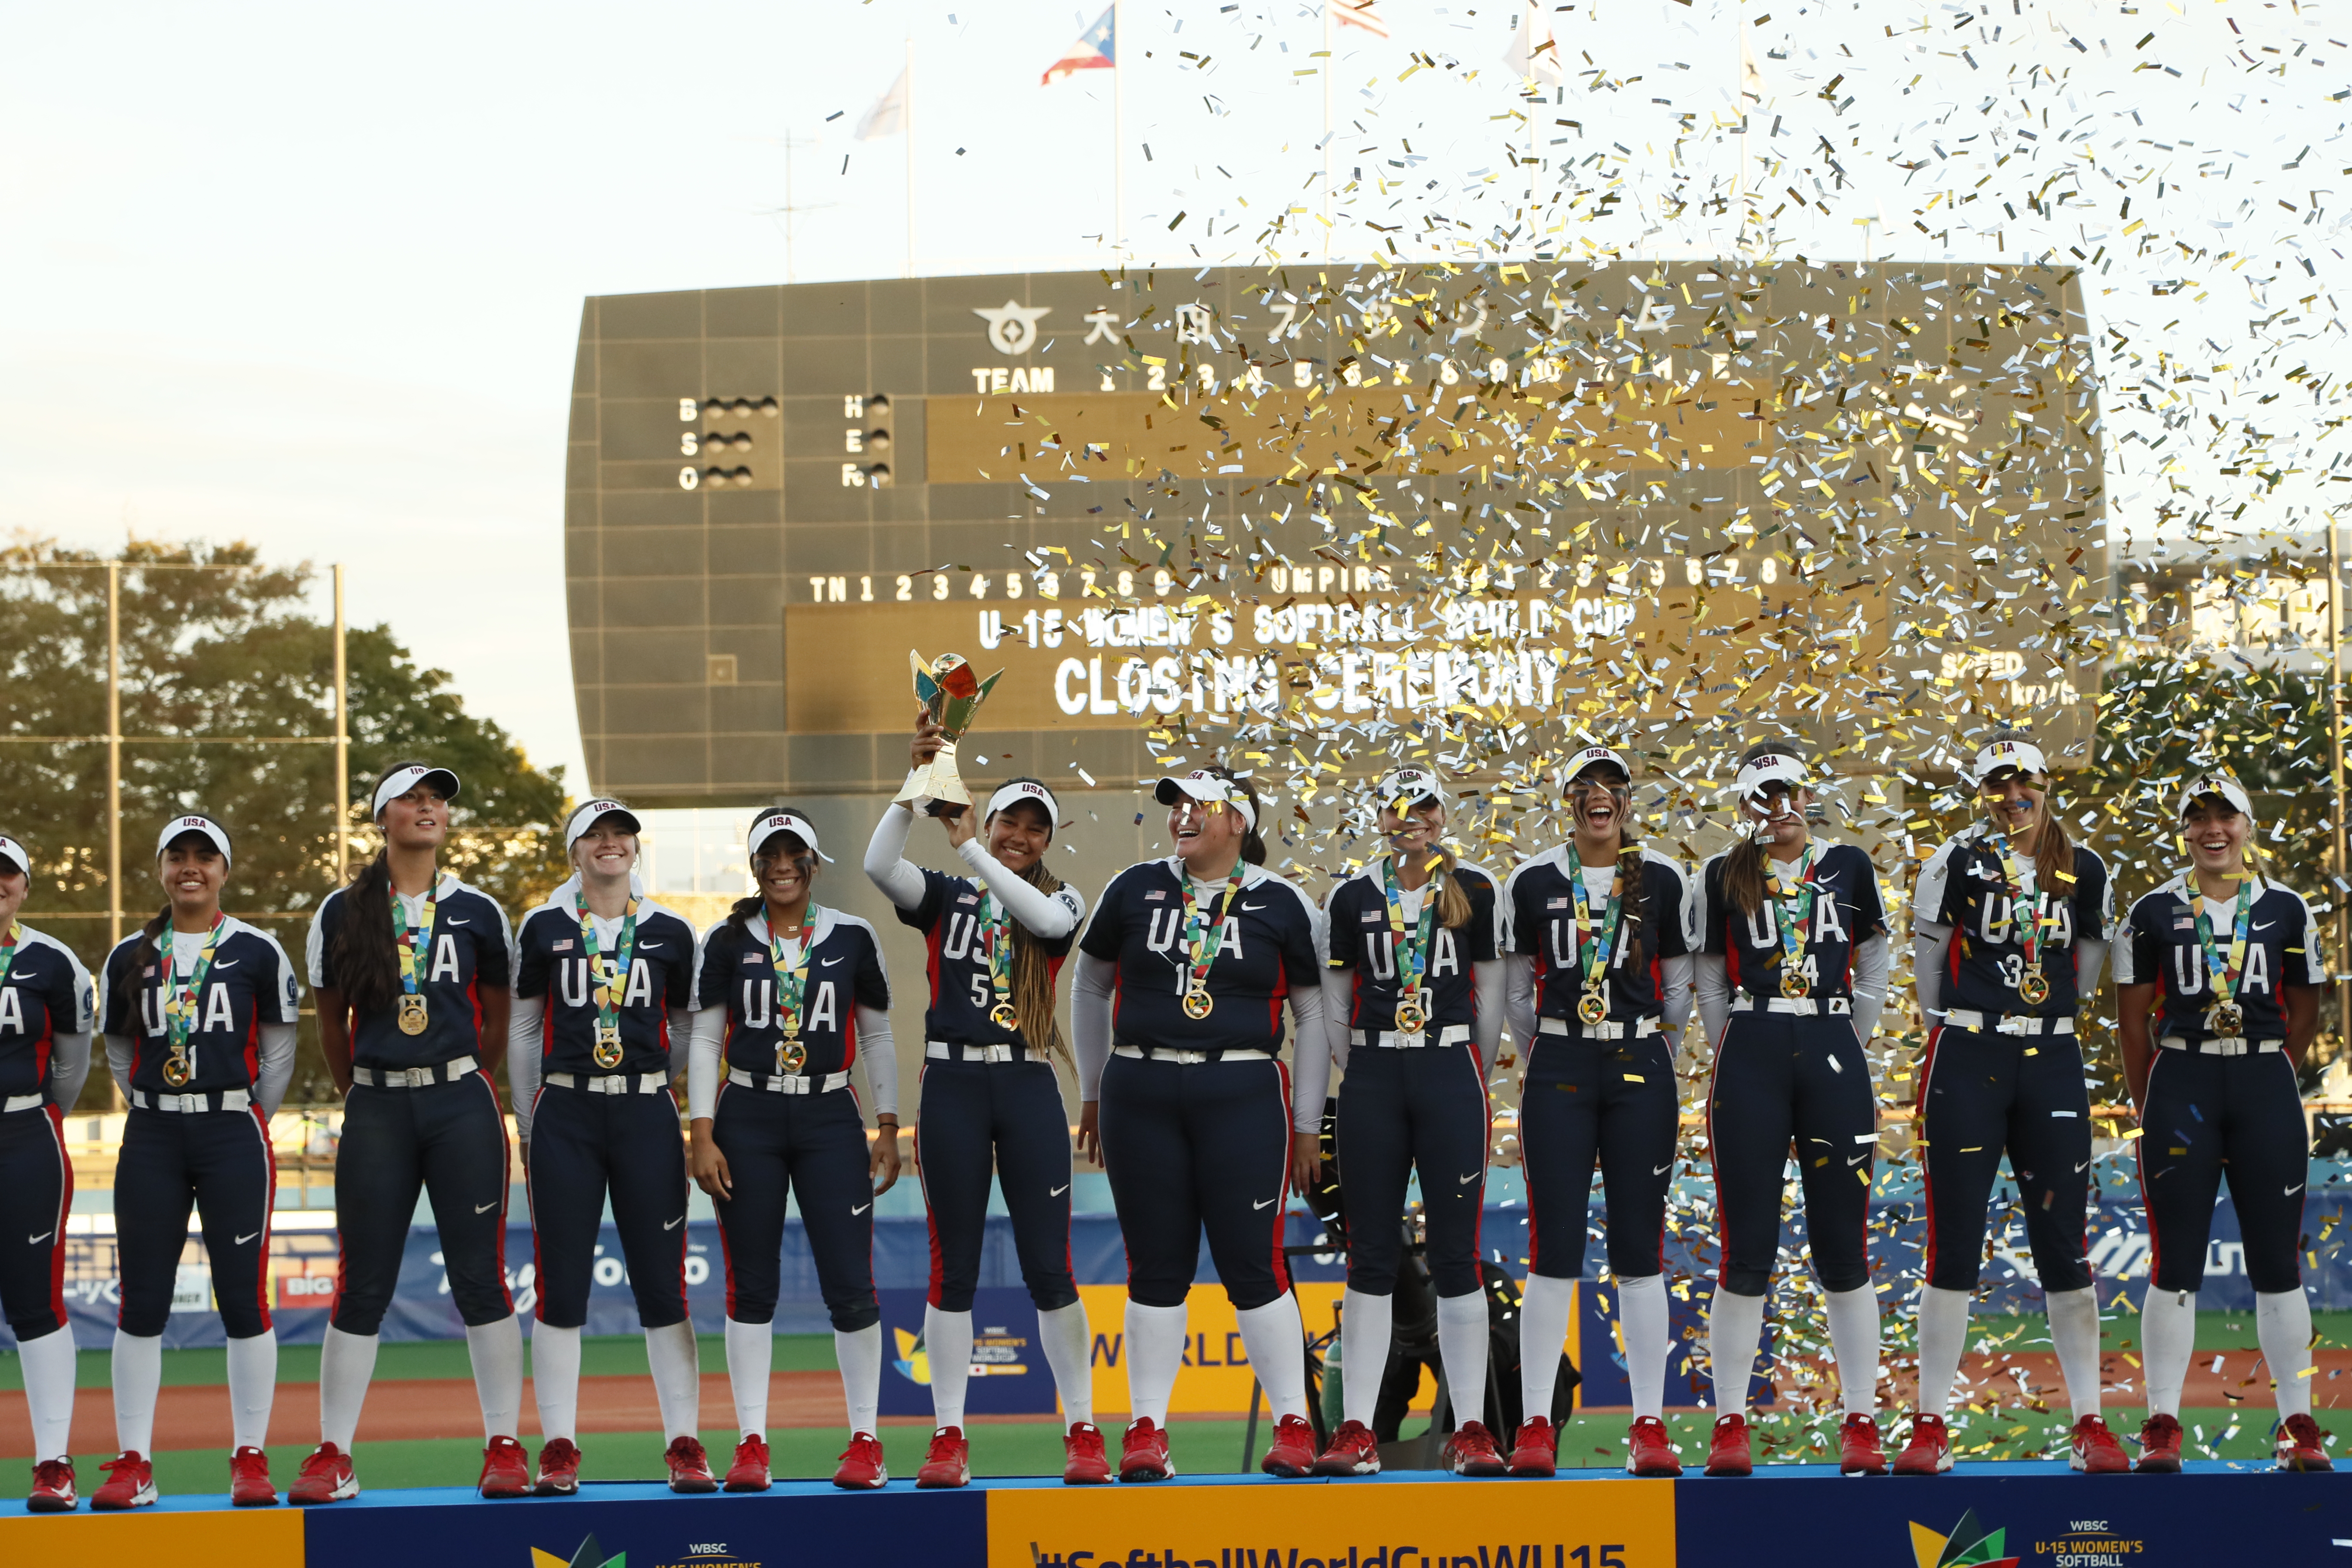 Staats, third from left, celebrates Team USA's championship win. Photo credit: WBSC.